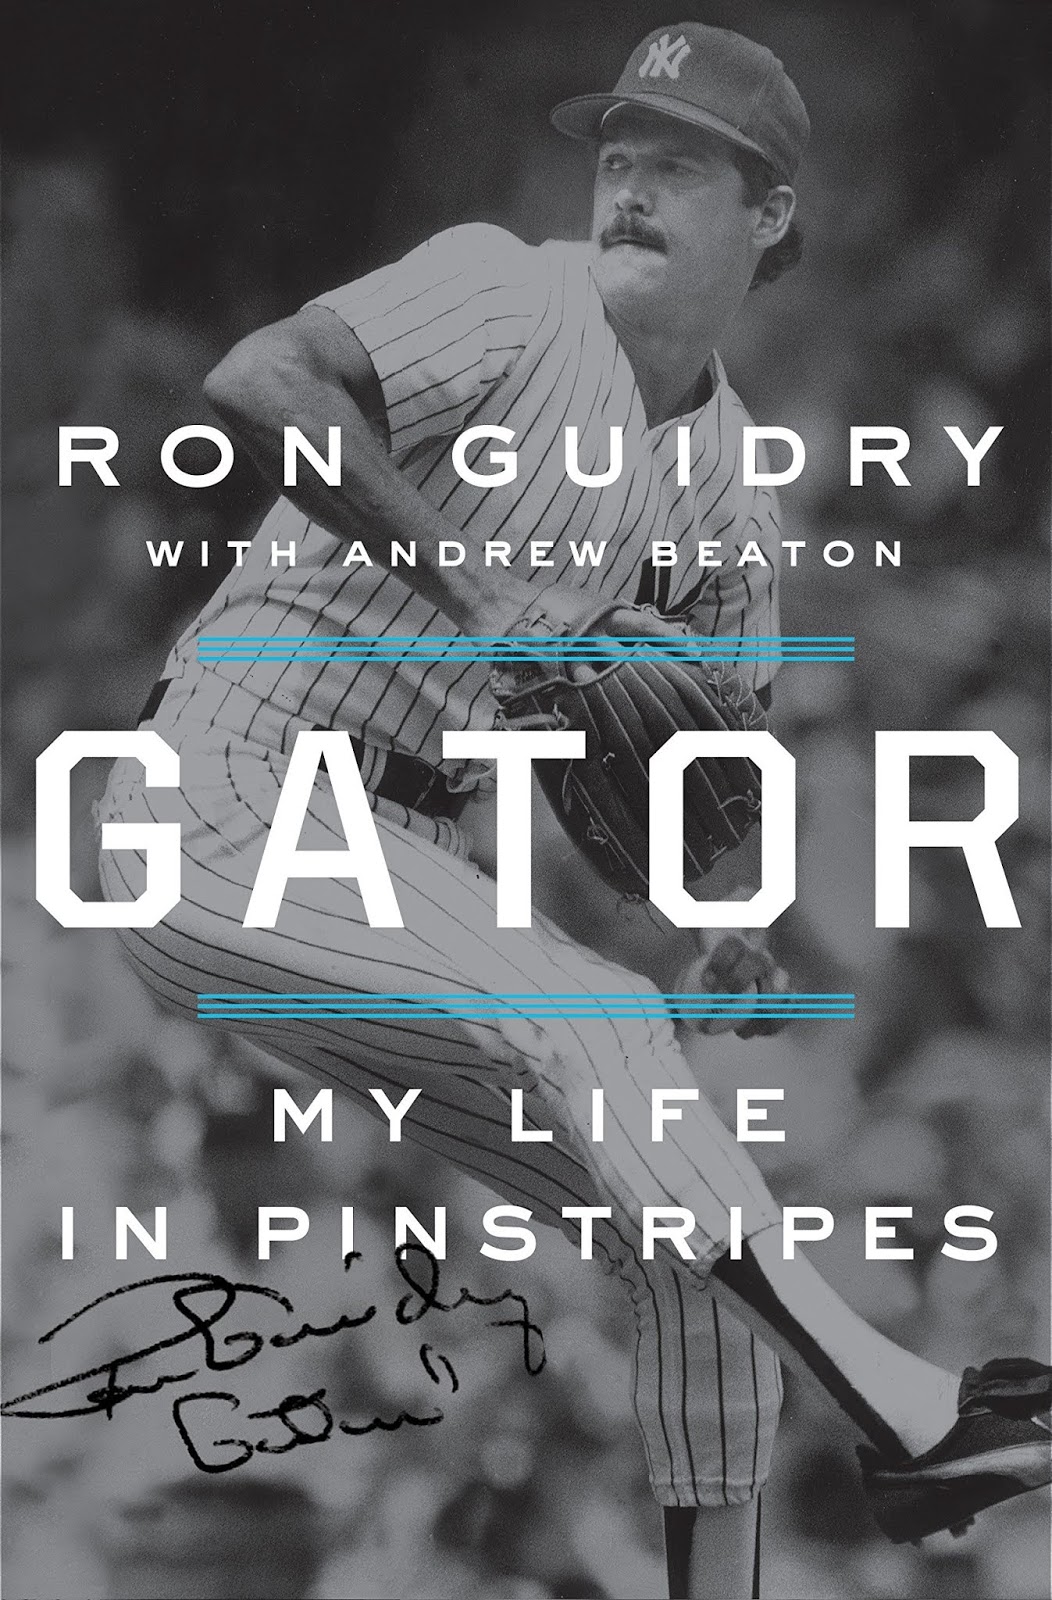 Book Review: 'Gator - My Life in Pinstripes' by Ron Guidry